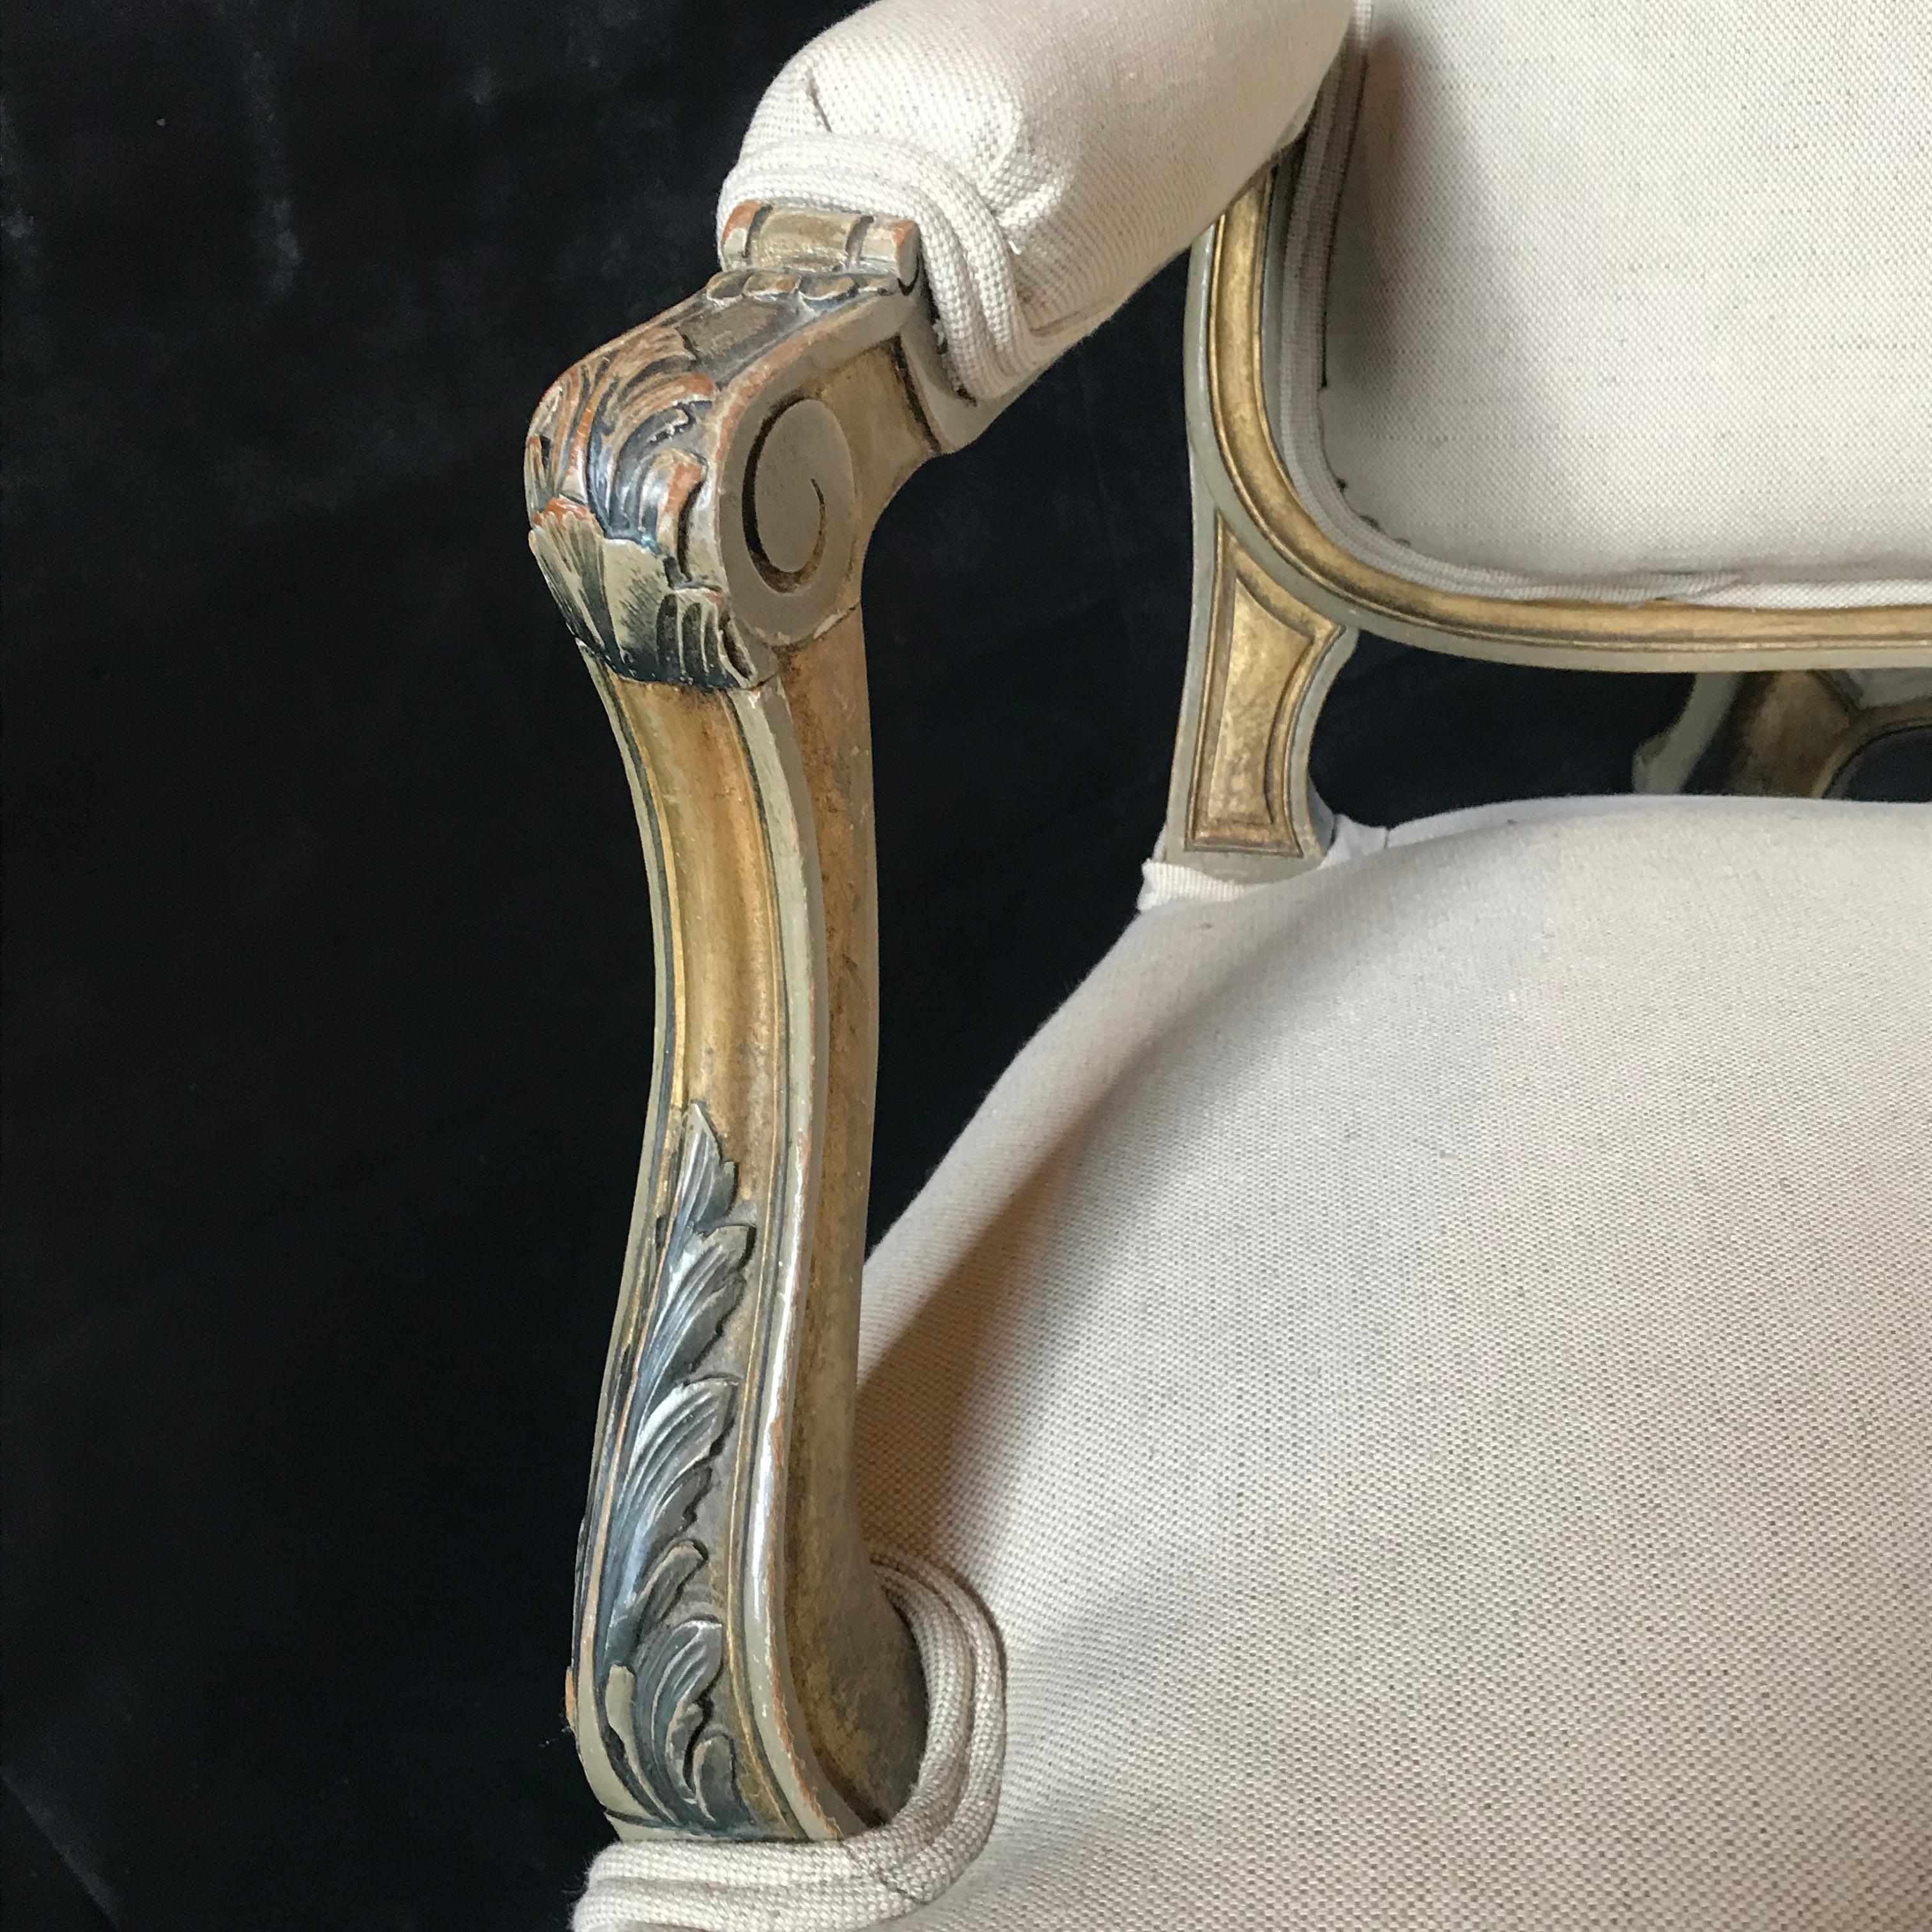 A stately Classic pair of carved wood French armchairs with original paint, gold with a little gray, as well as fresh new neutral cotton linen upholstery.
Measures: Chairs back height 38”, width 27”, seat height 18”, arm height 25 1/2”.